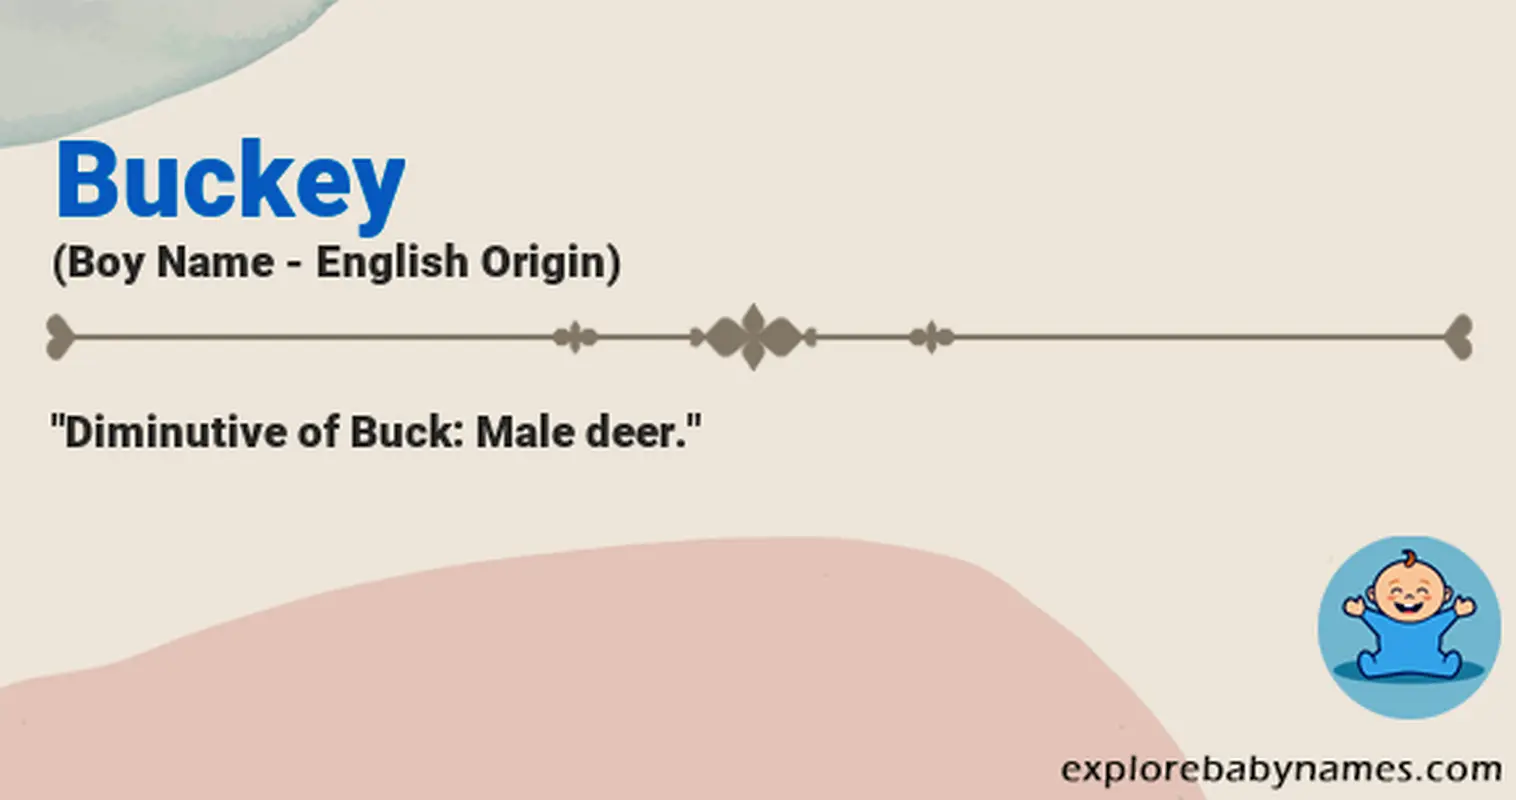 Meaning of Buckey